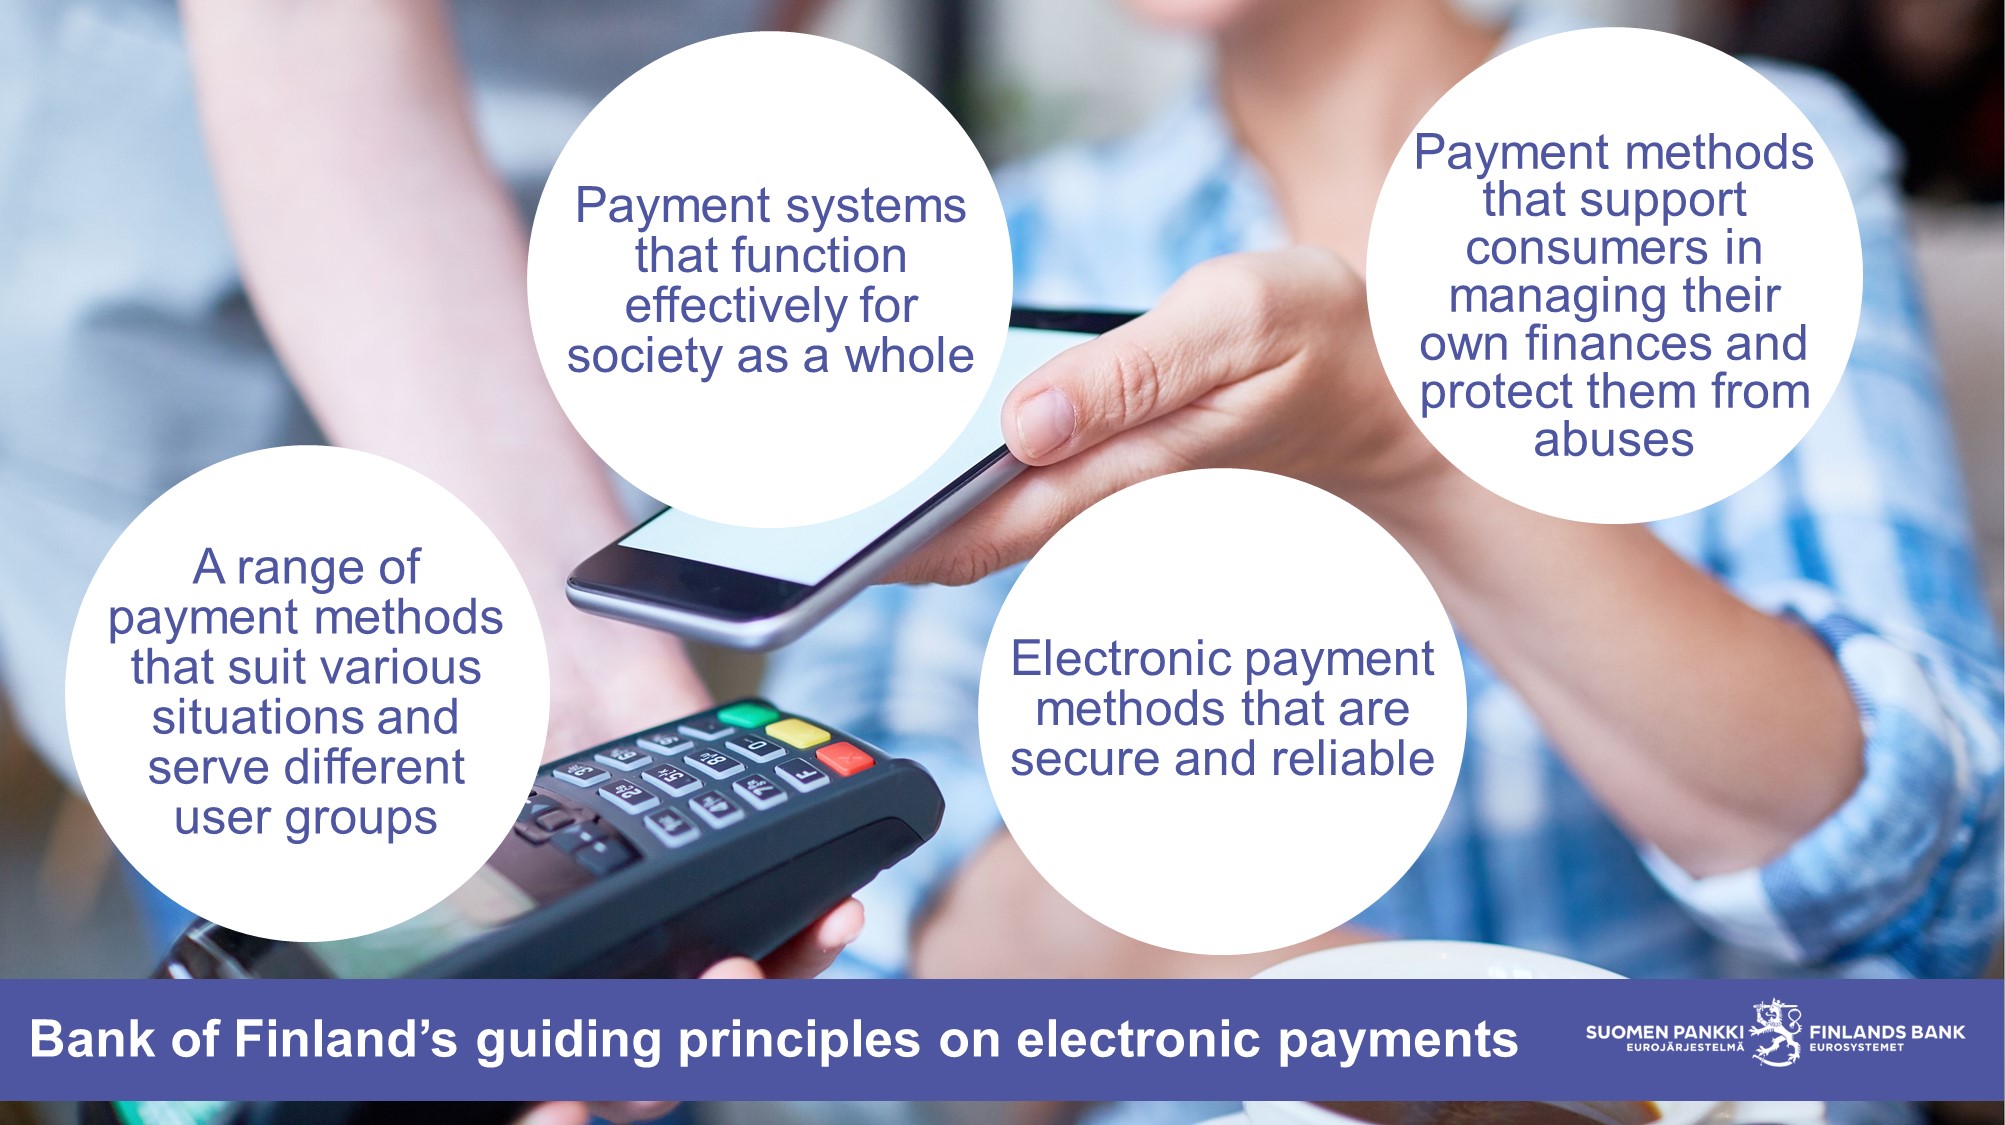 Bank of Finland’s guiding principles on electronic payments: 1. A range of payment methods that suit various situations and serve different user groups. 2. Payment systems that function effectively for society as a whole. 3. Electronic payment methods that are secure and reliable. 4. Payment methods that support consumers in managing their own finances and protect them from abuses.